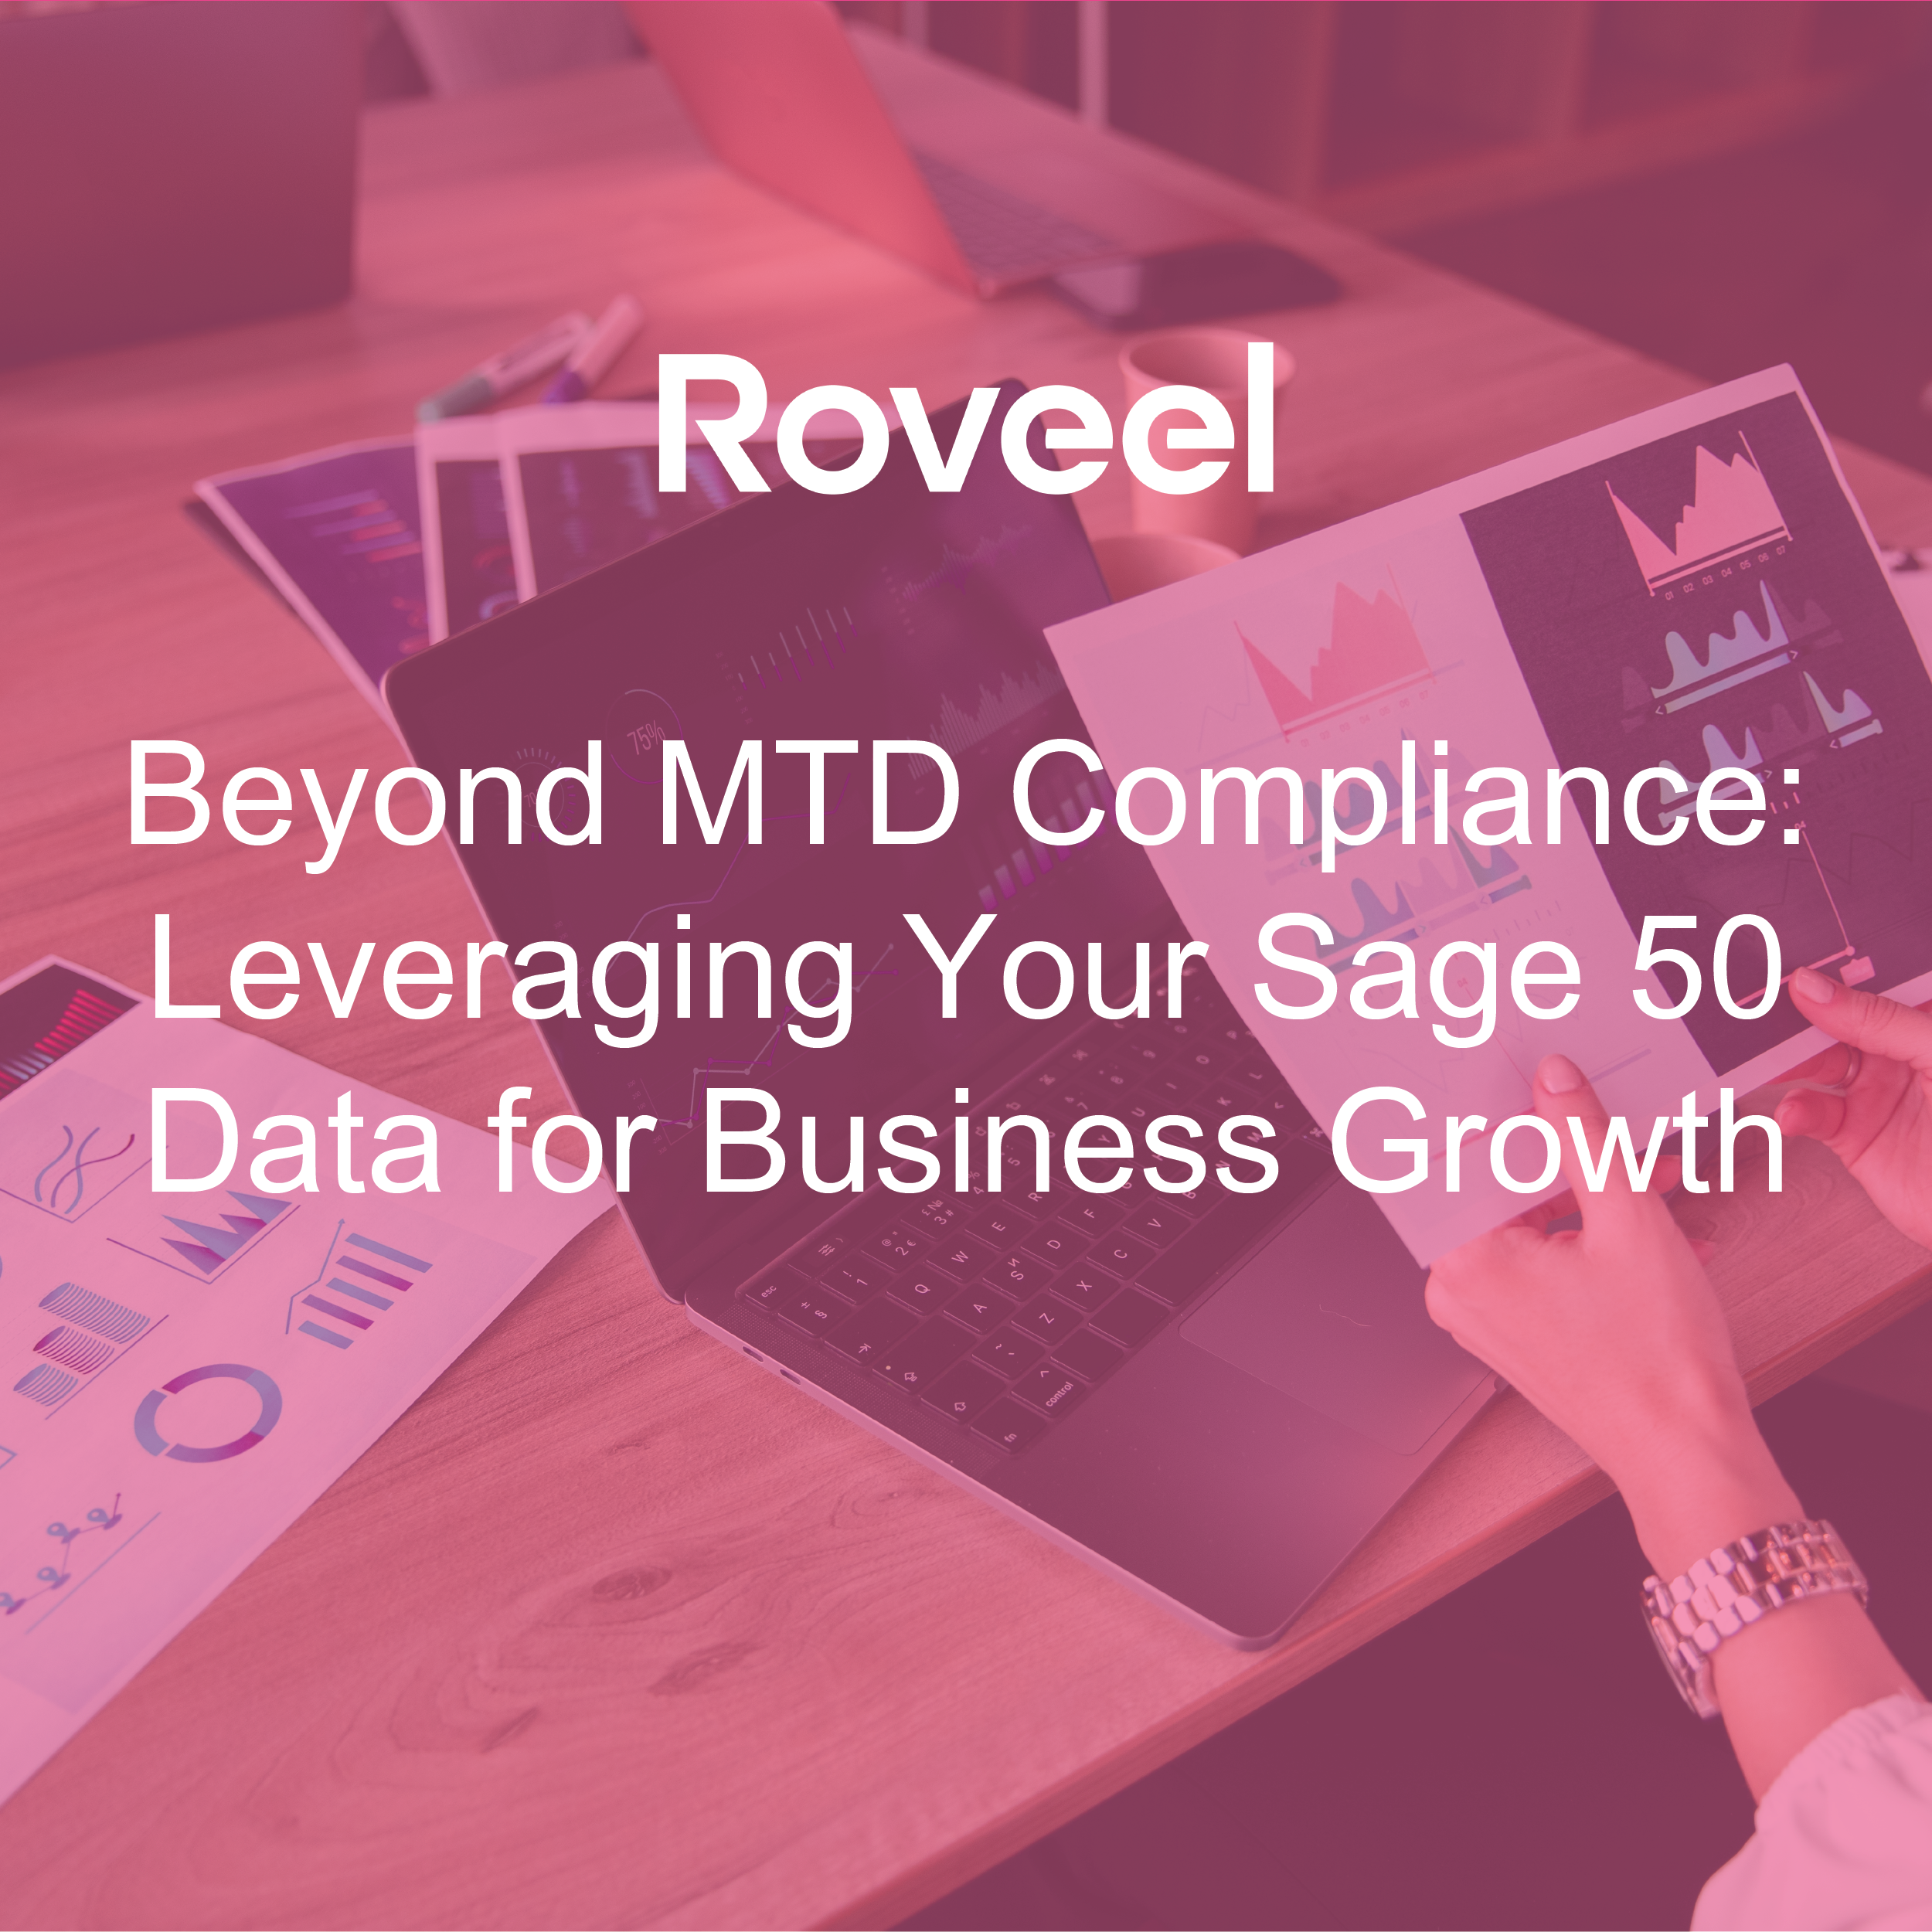 Roveel Blog Beyond MTD Compliance Leveraging Your Sage 50 Data for Business Growth Thumbnail-01